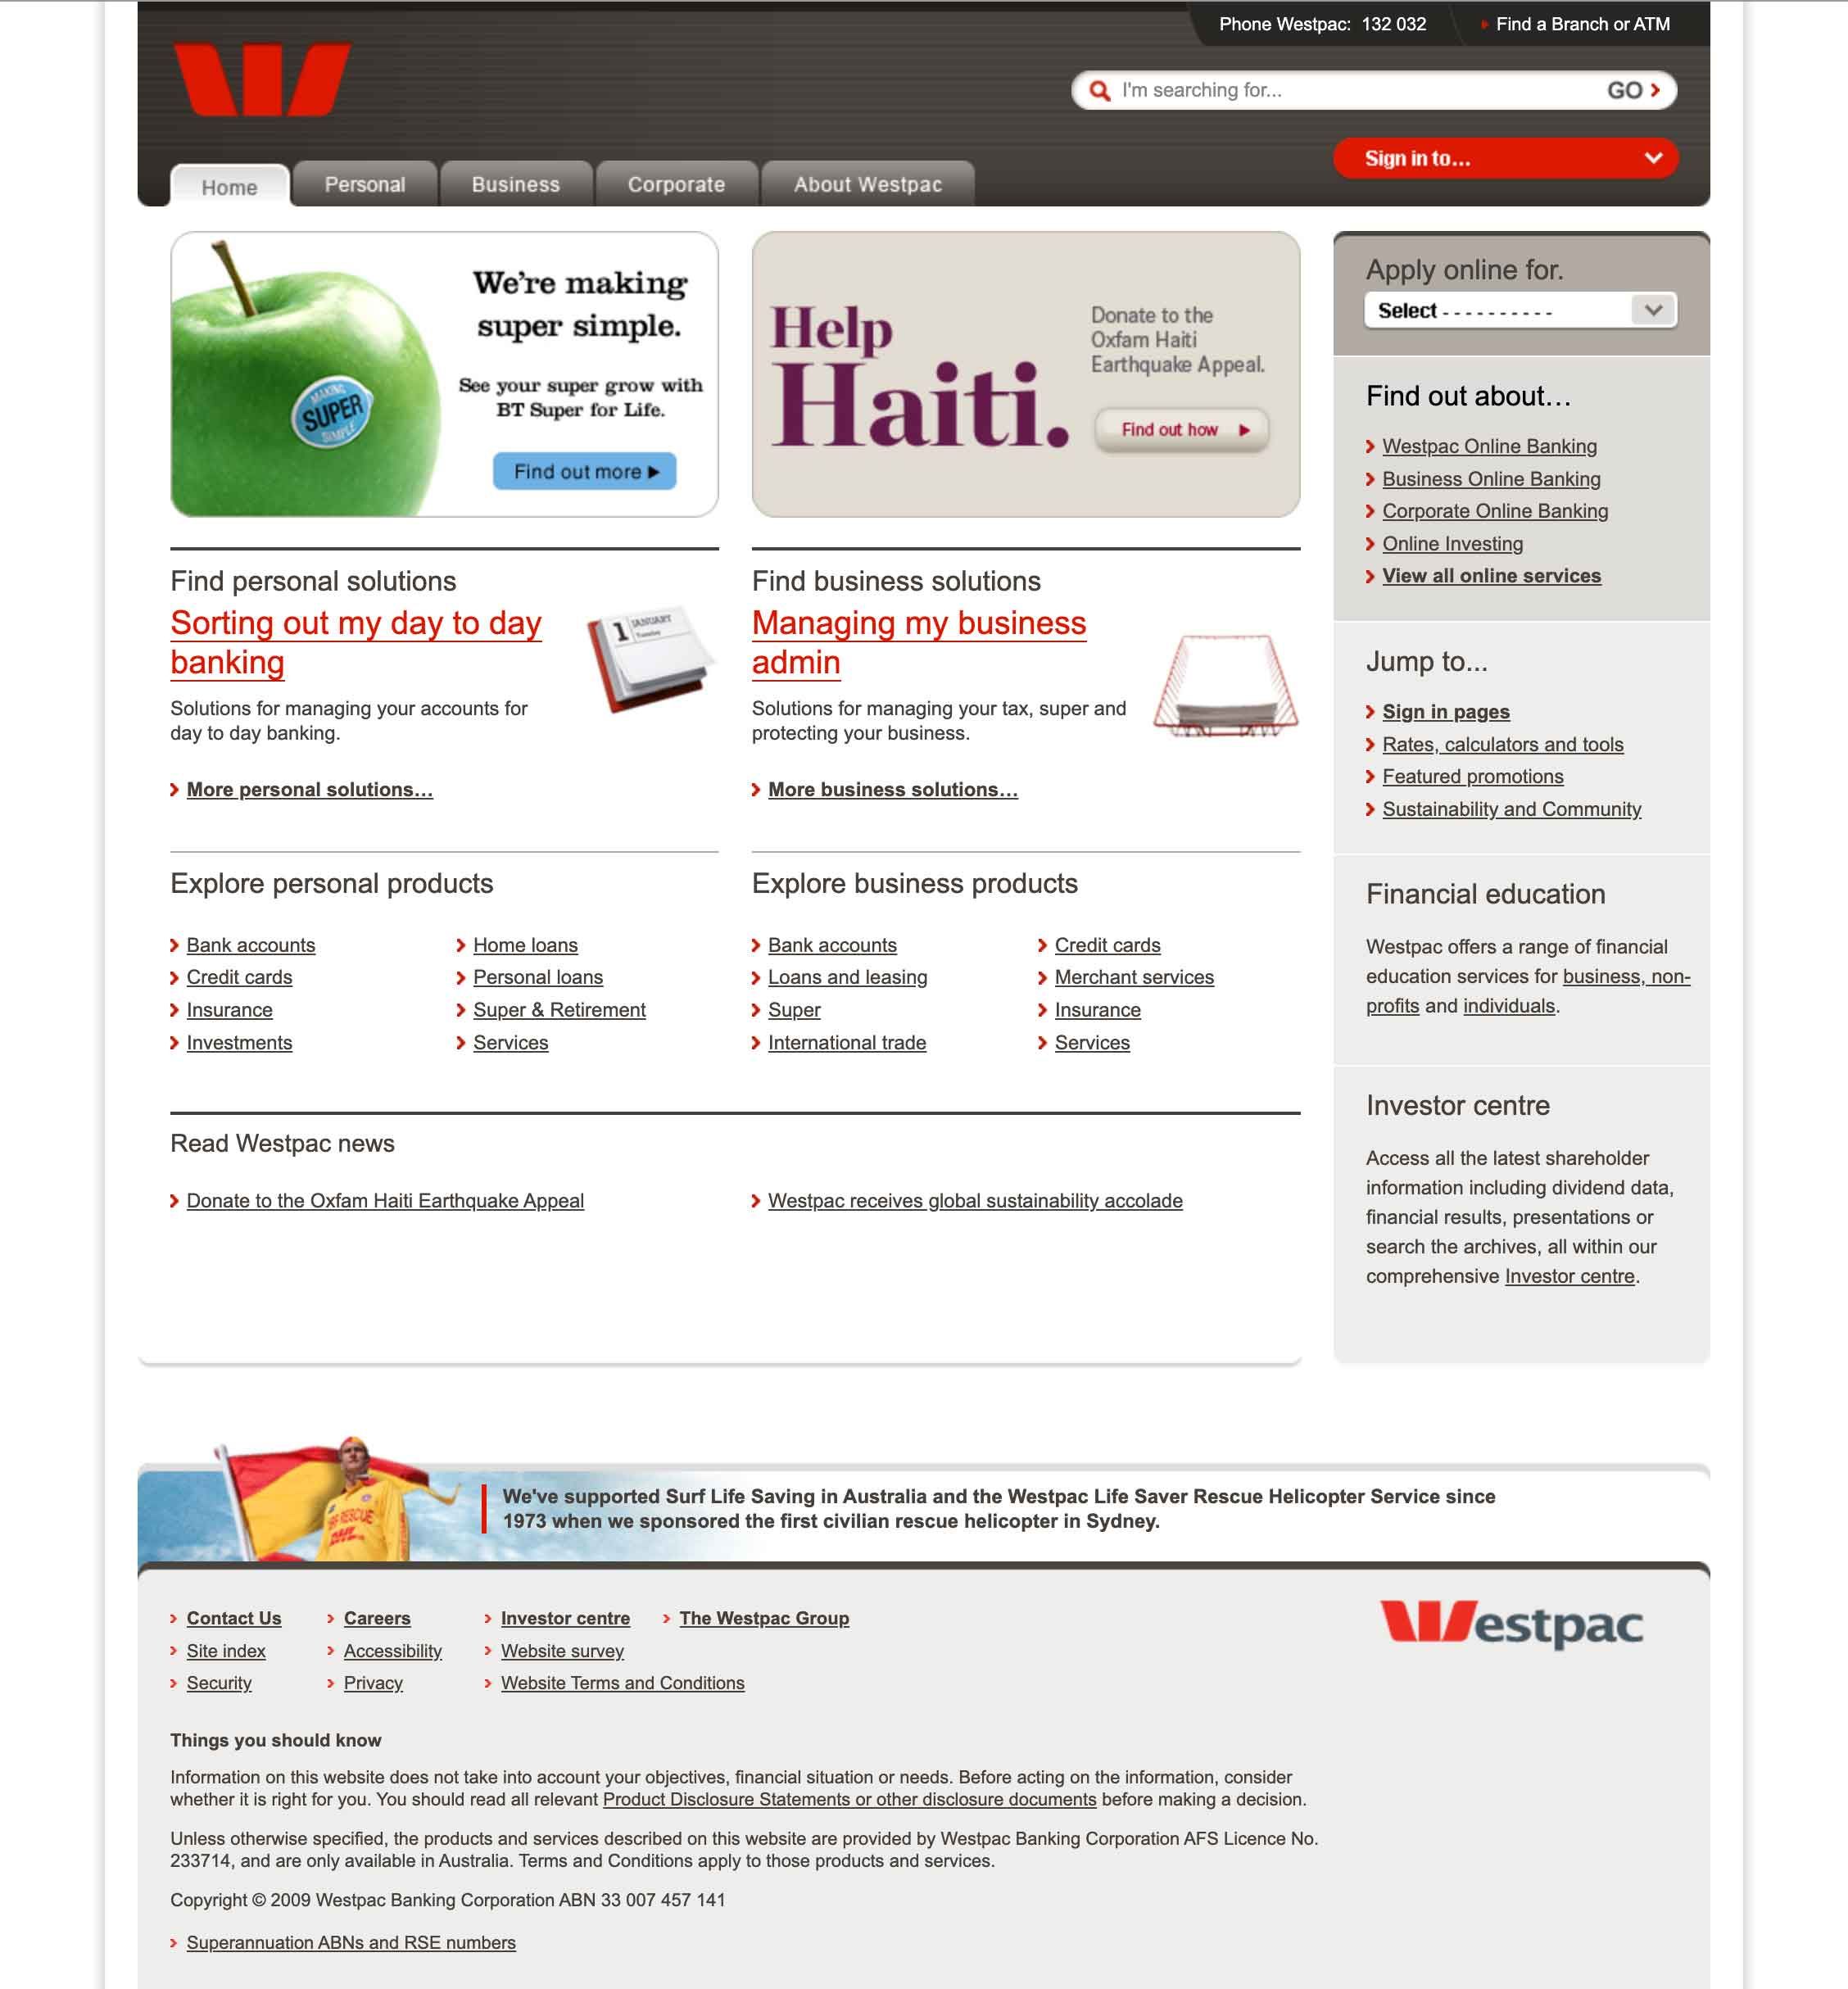 Westpac Intranet upgrade from IE7 to IE8